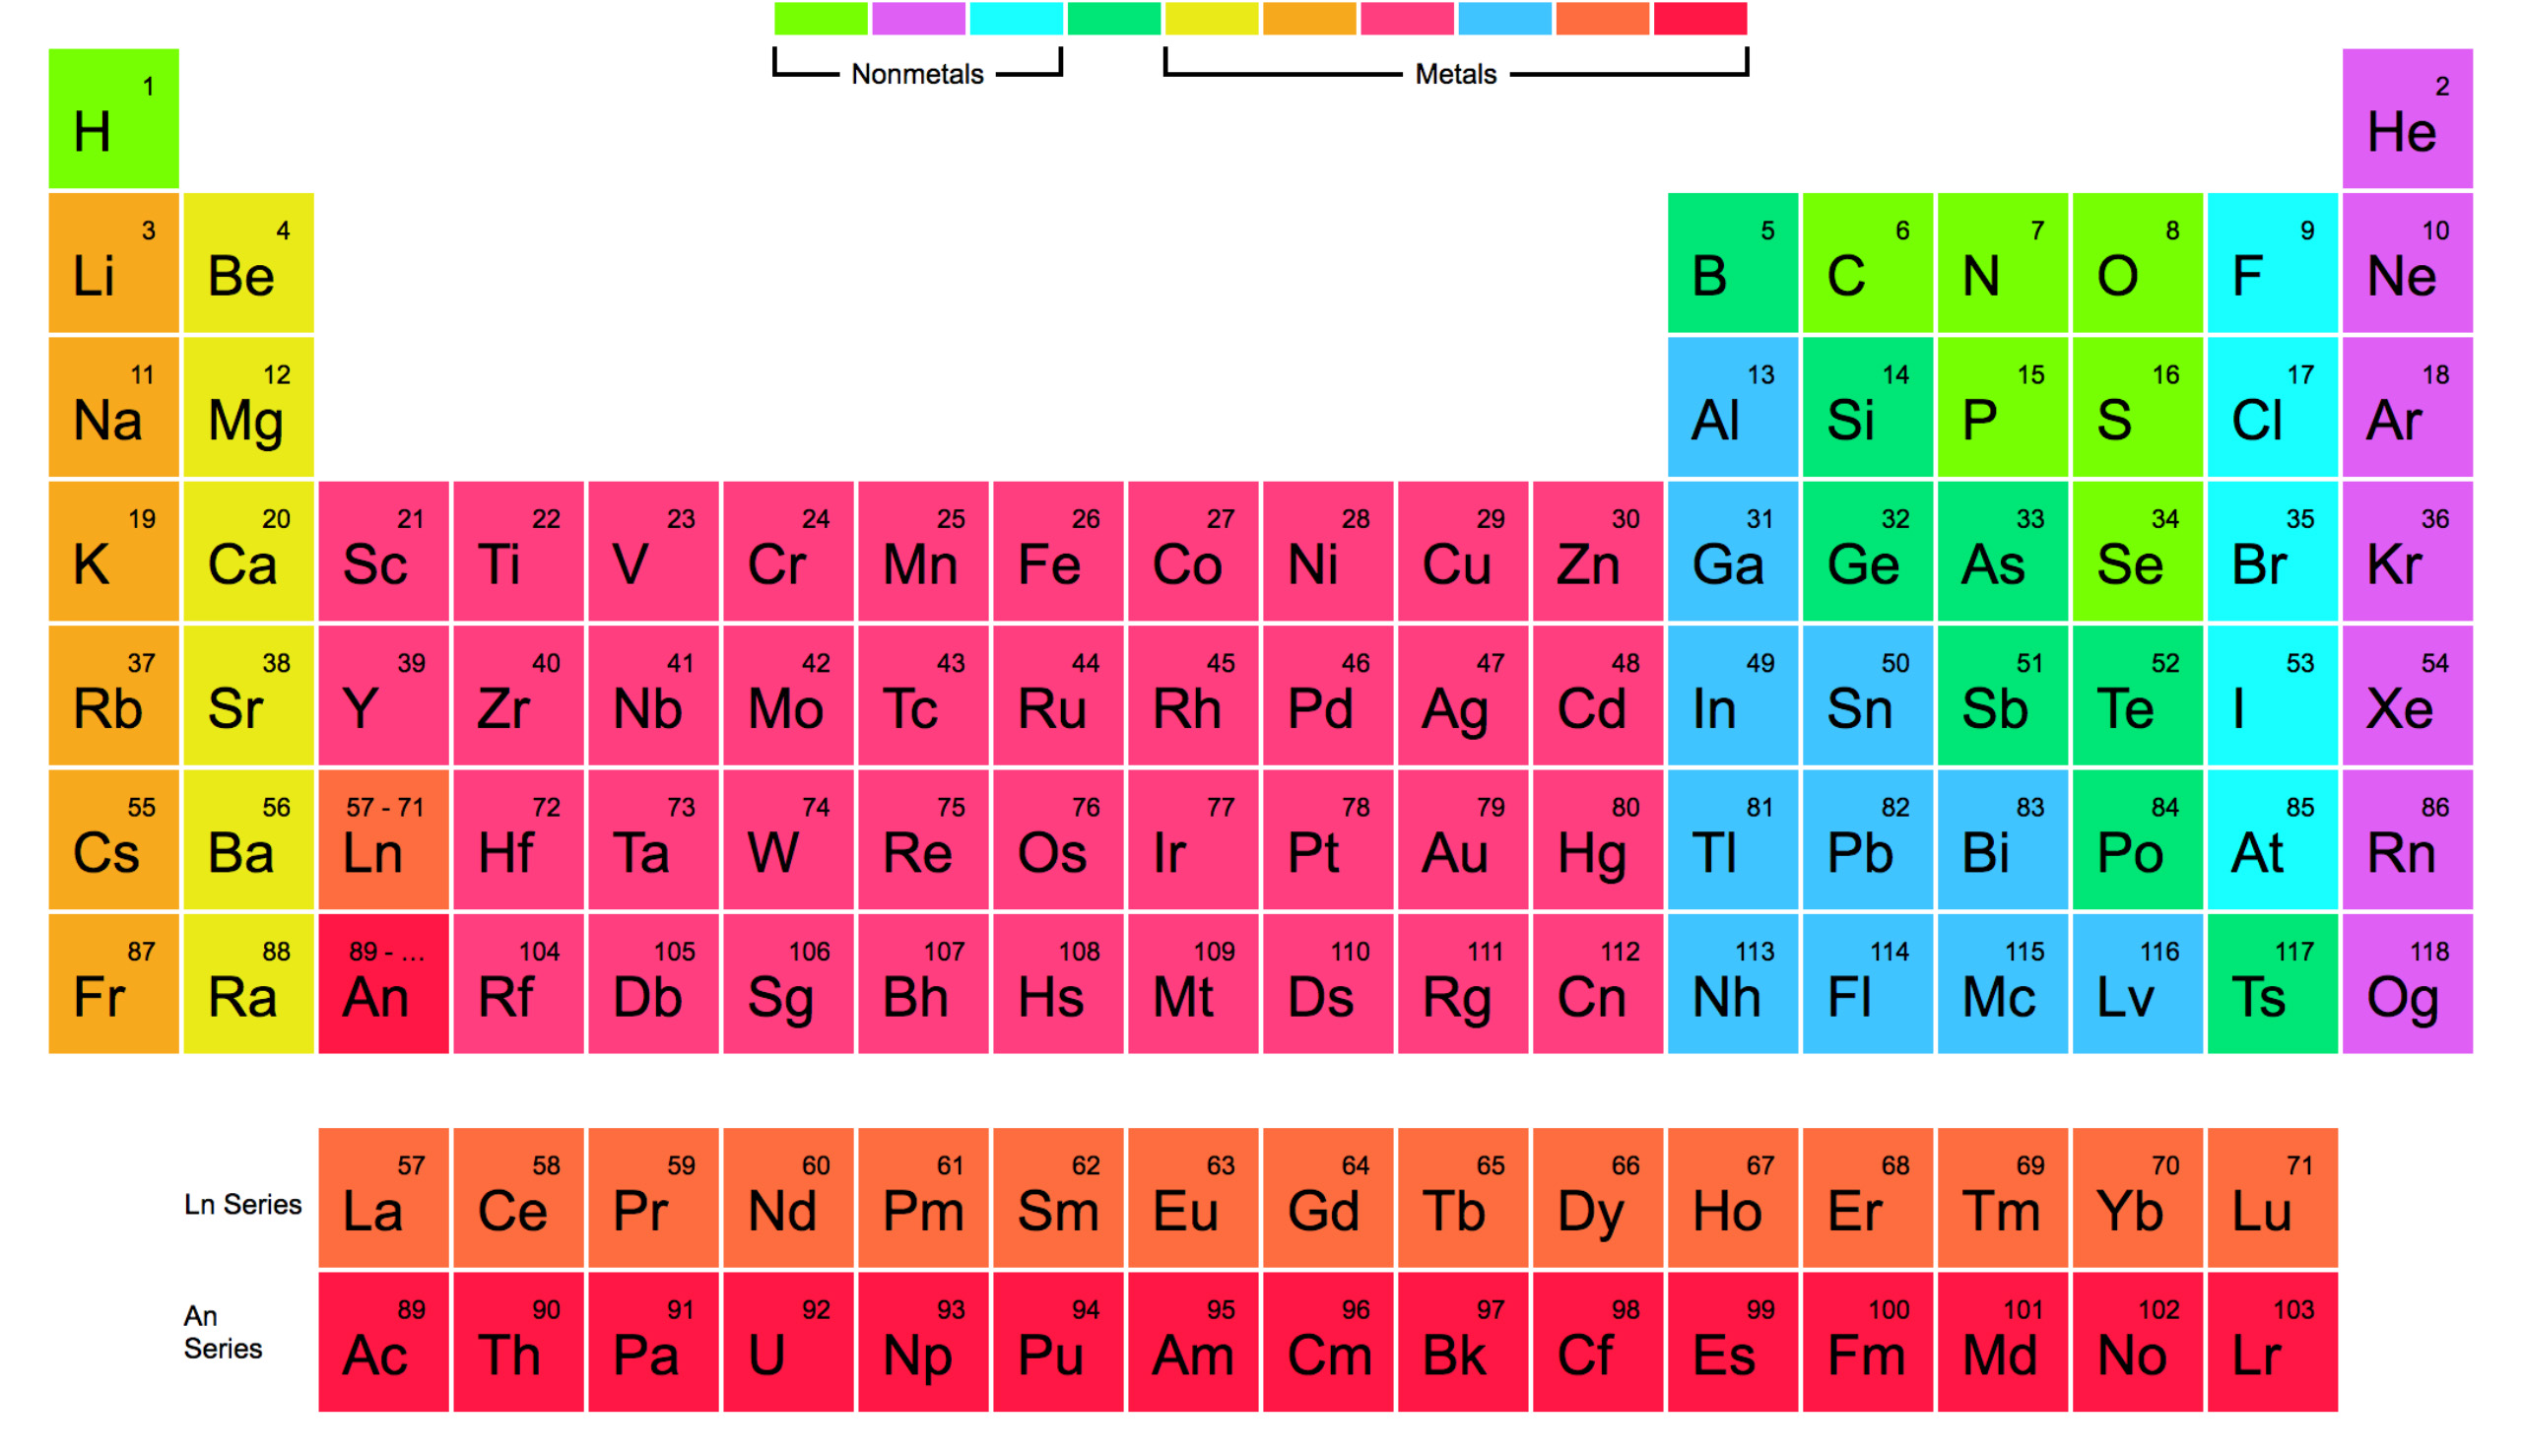 Large Periodic Table Of Elements